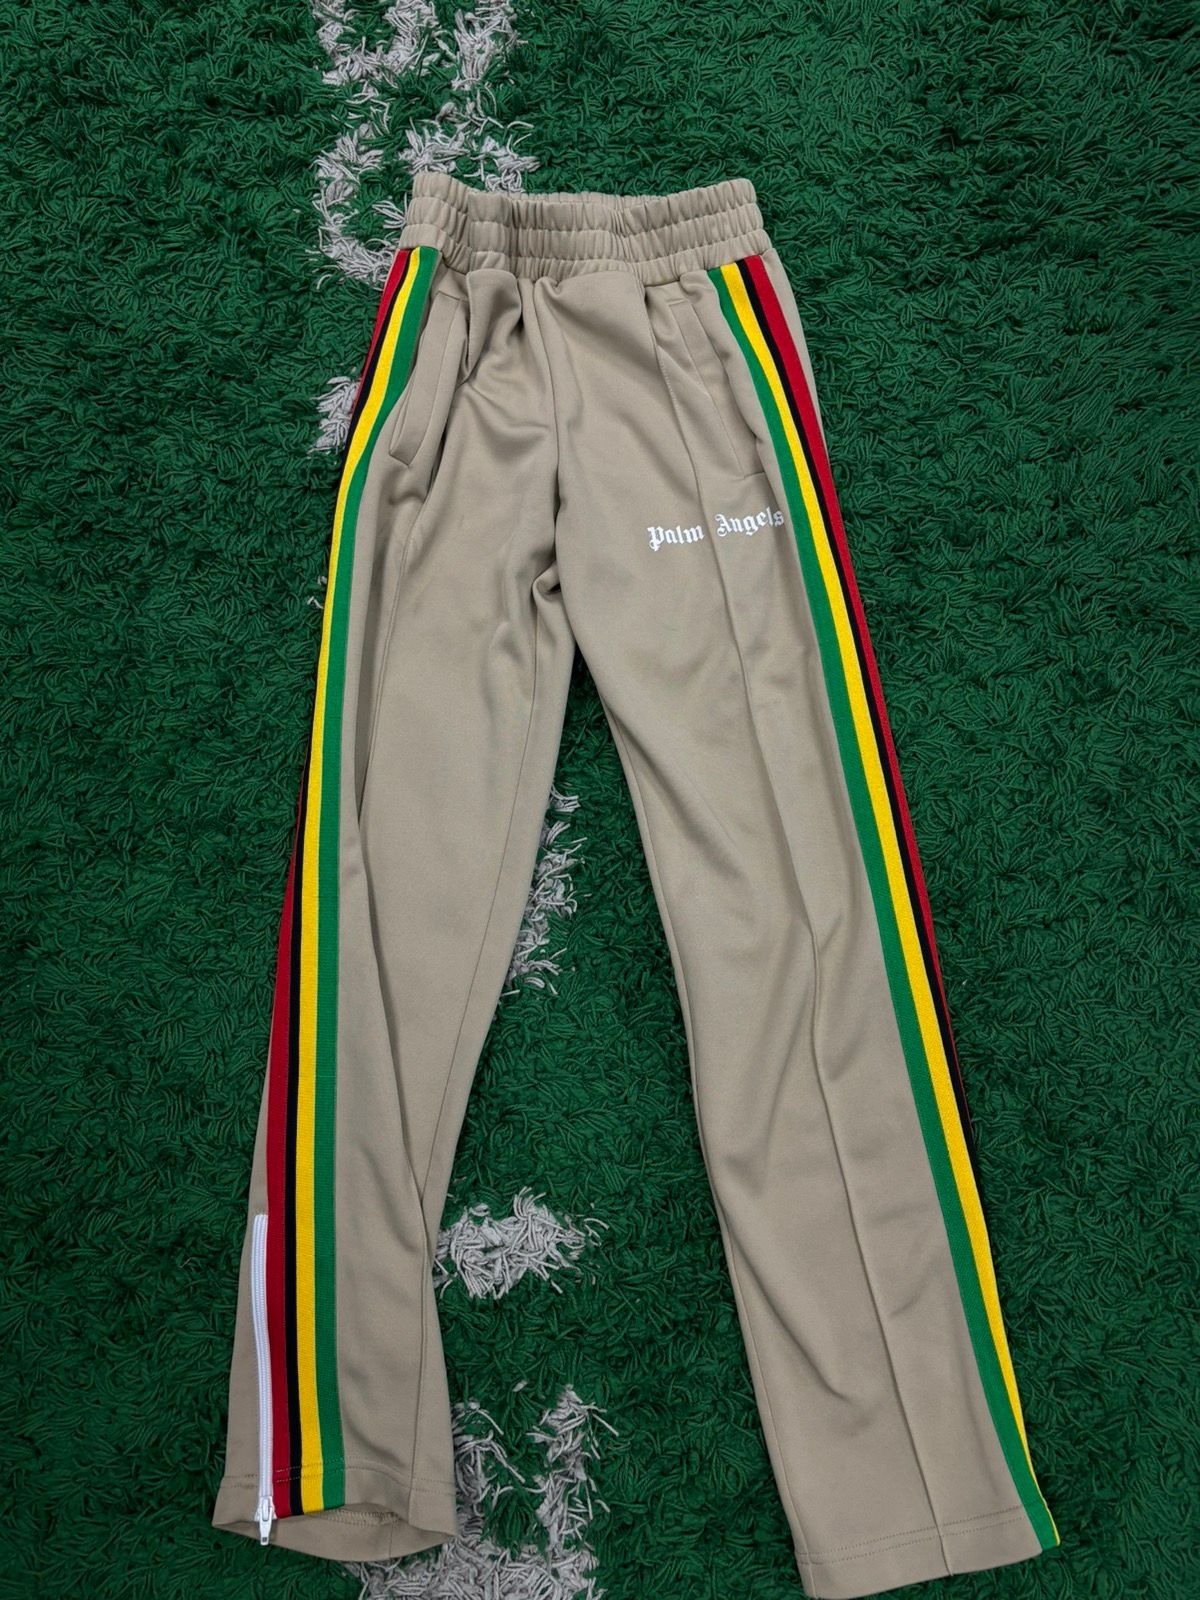 Pre-owned Palm Angels Sweatpants Pants Tan Small